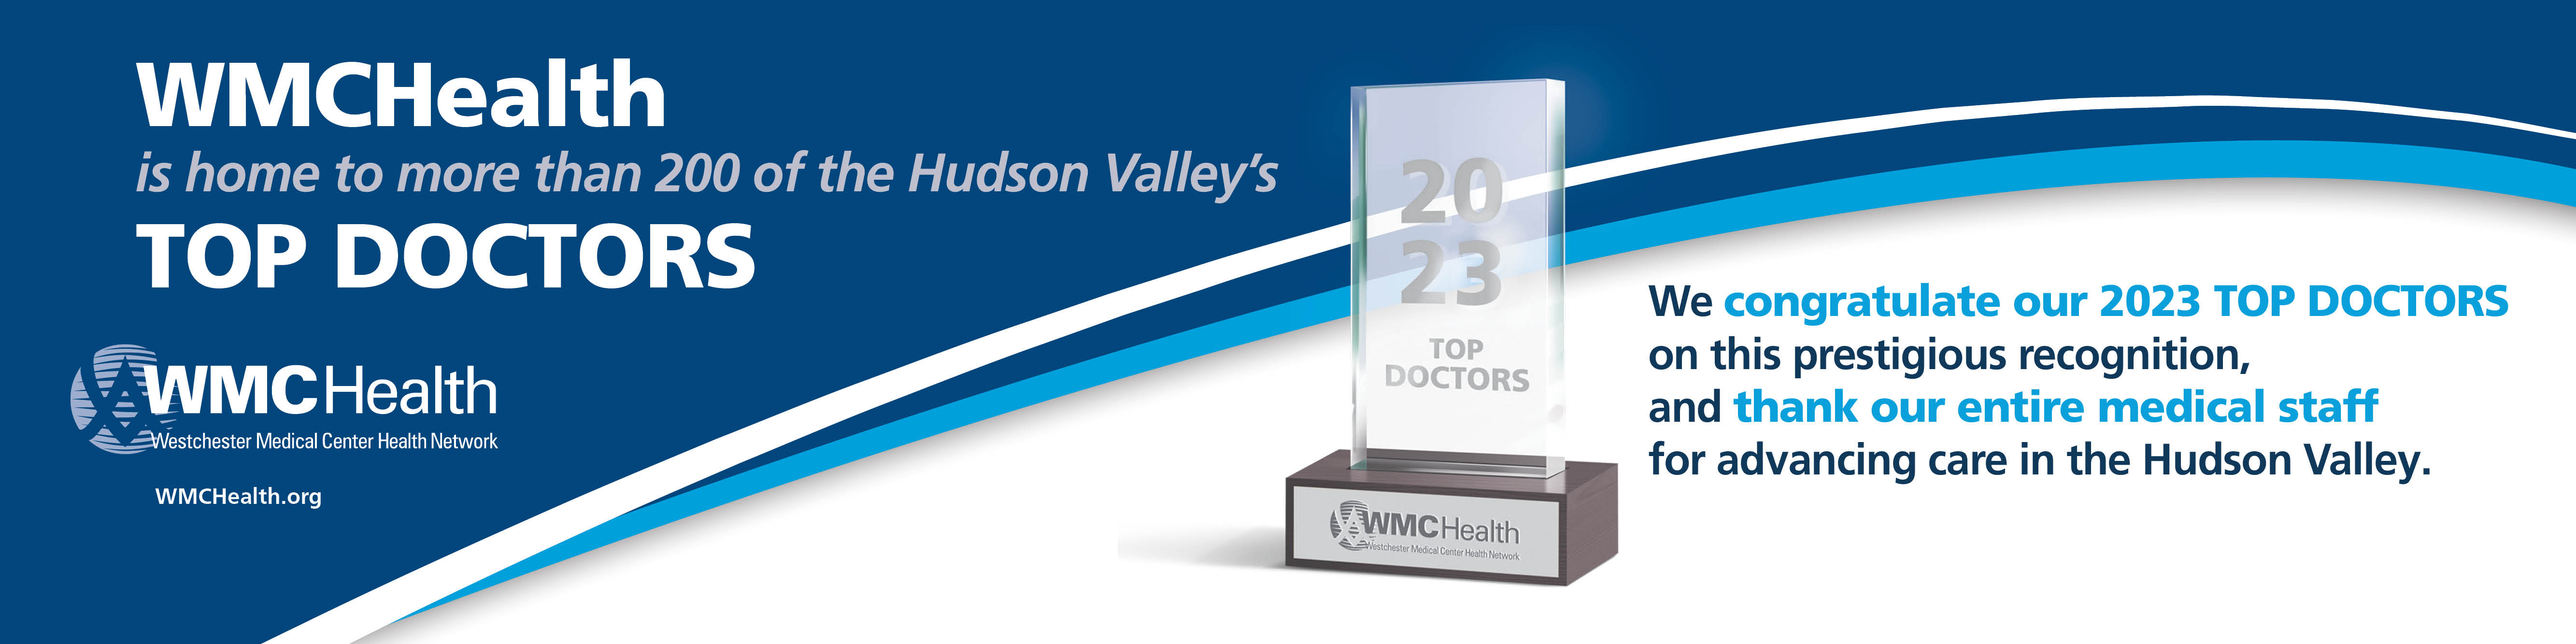 View WMCHealth's top doctors from 2023